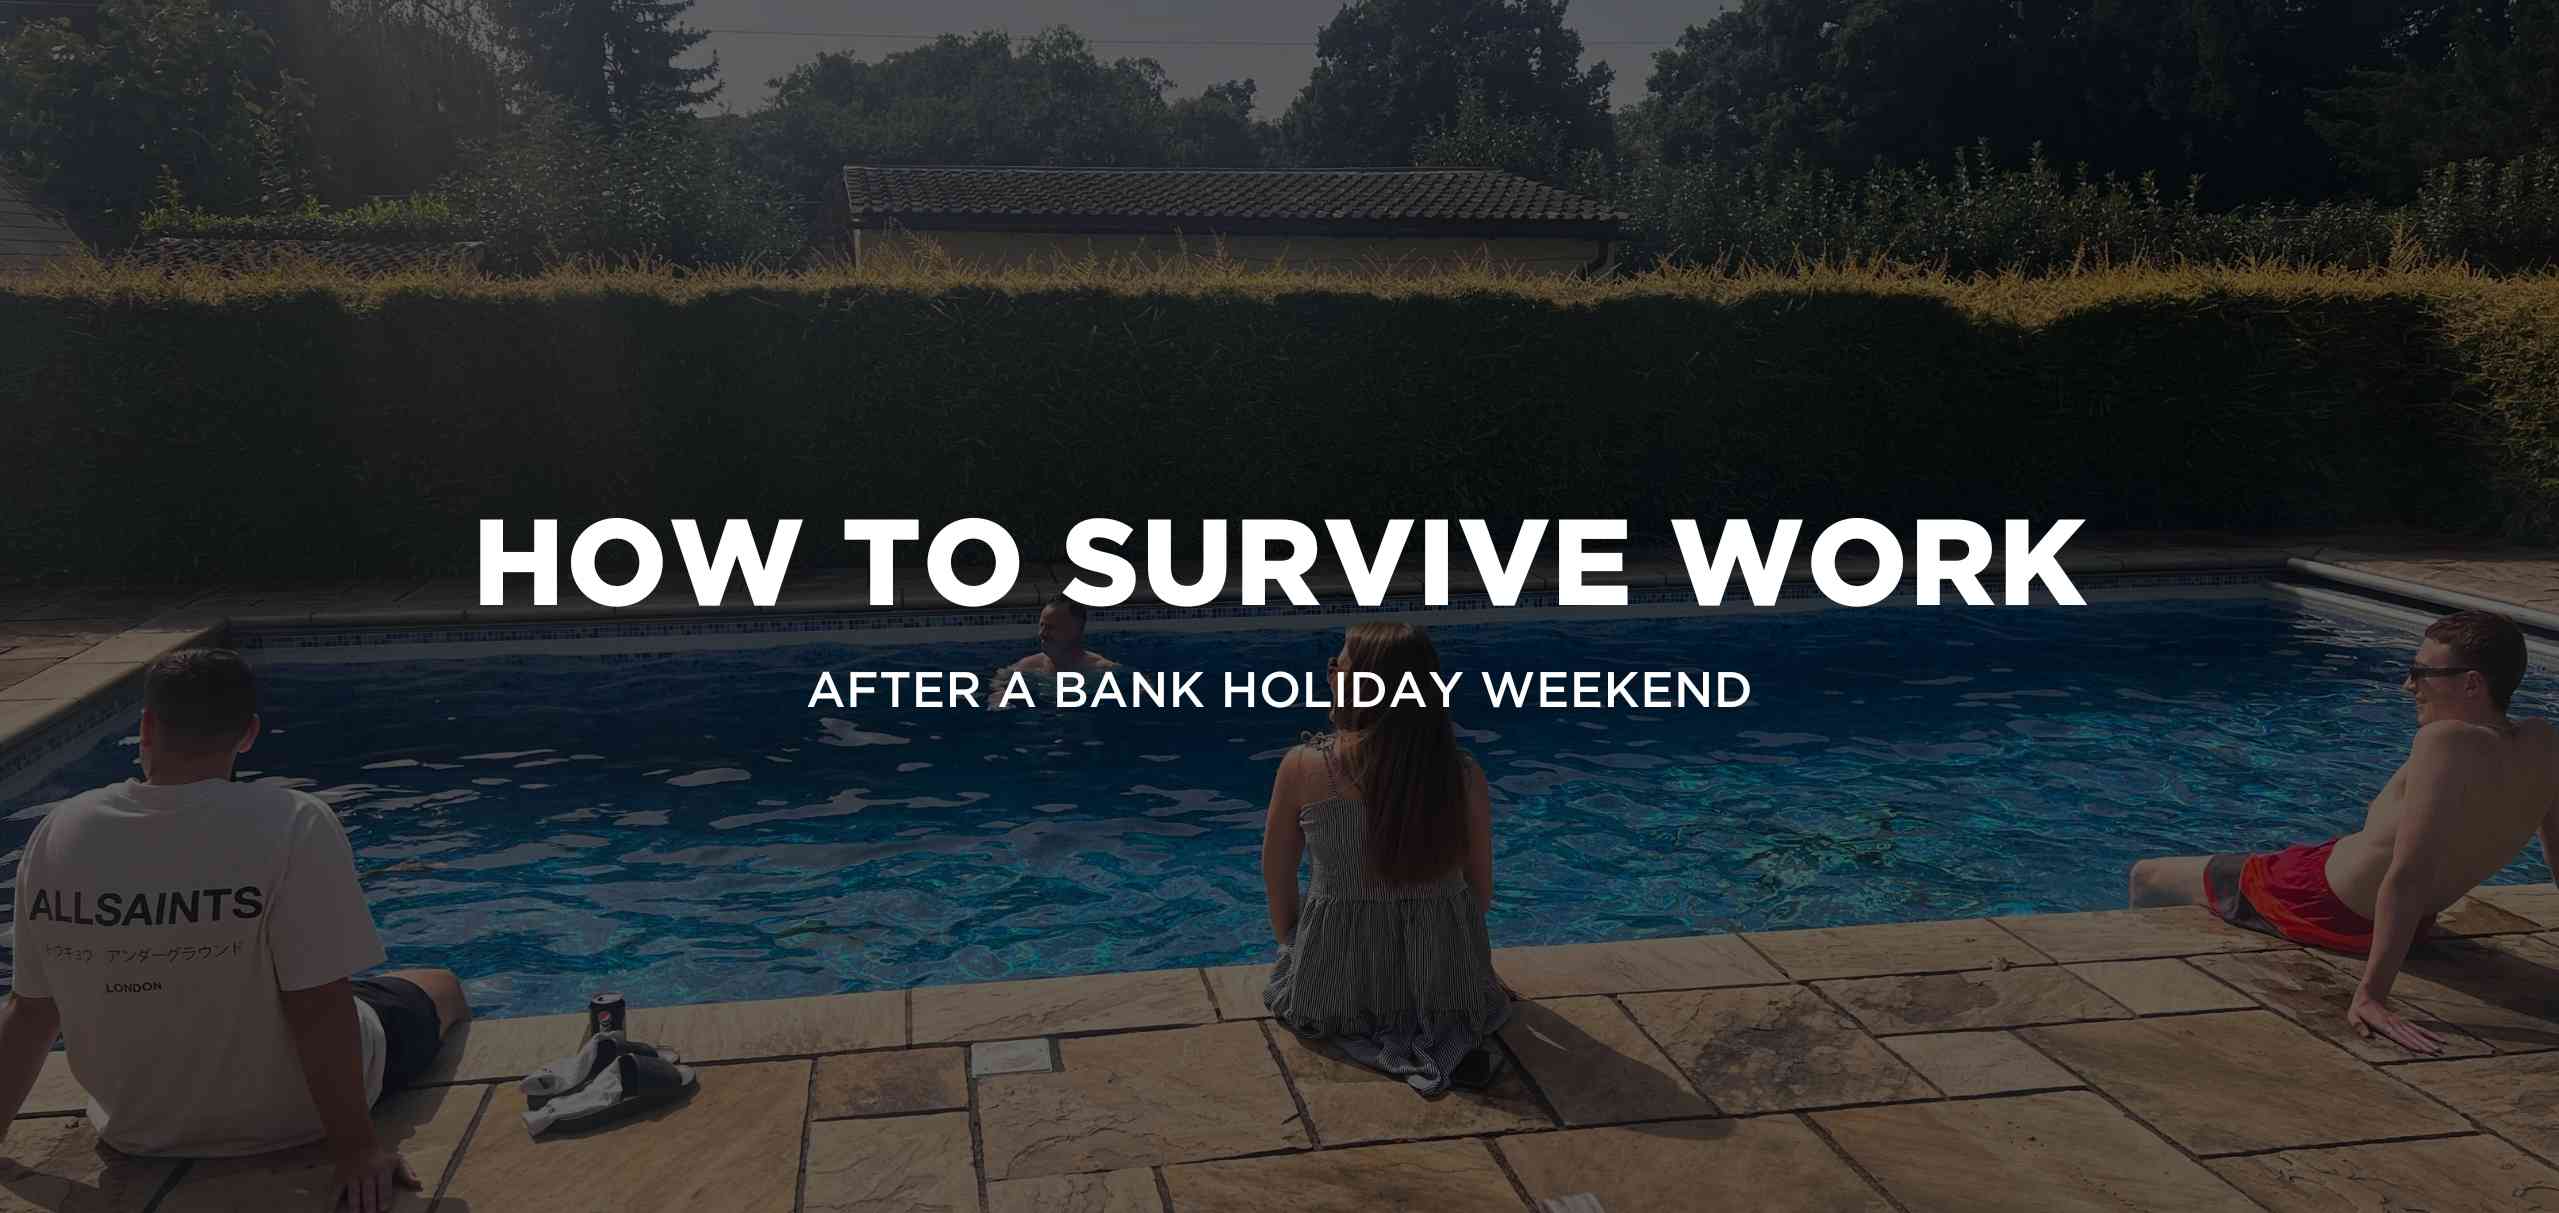 How to survive work after a bank holiday weekend